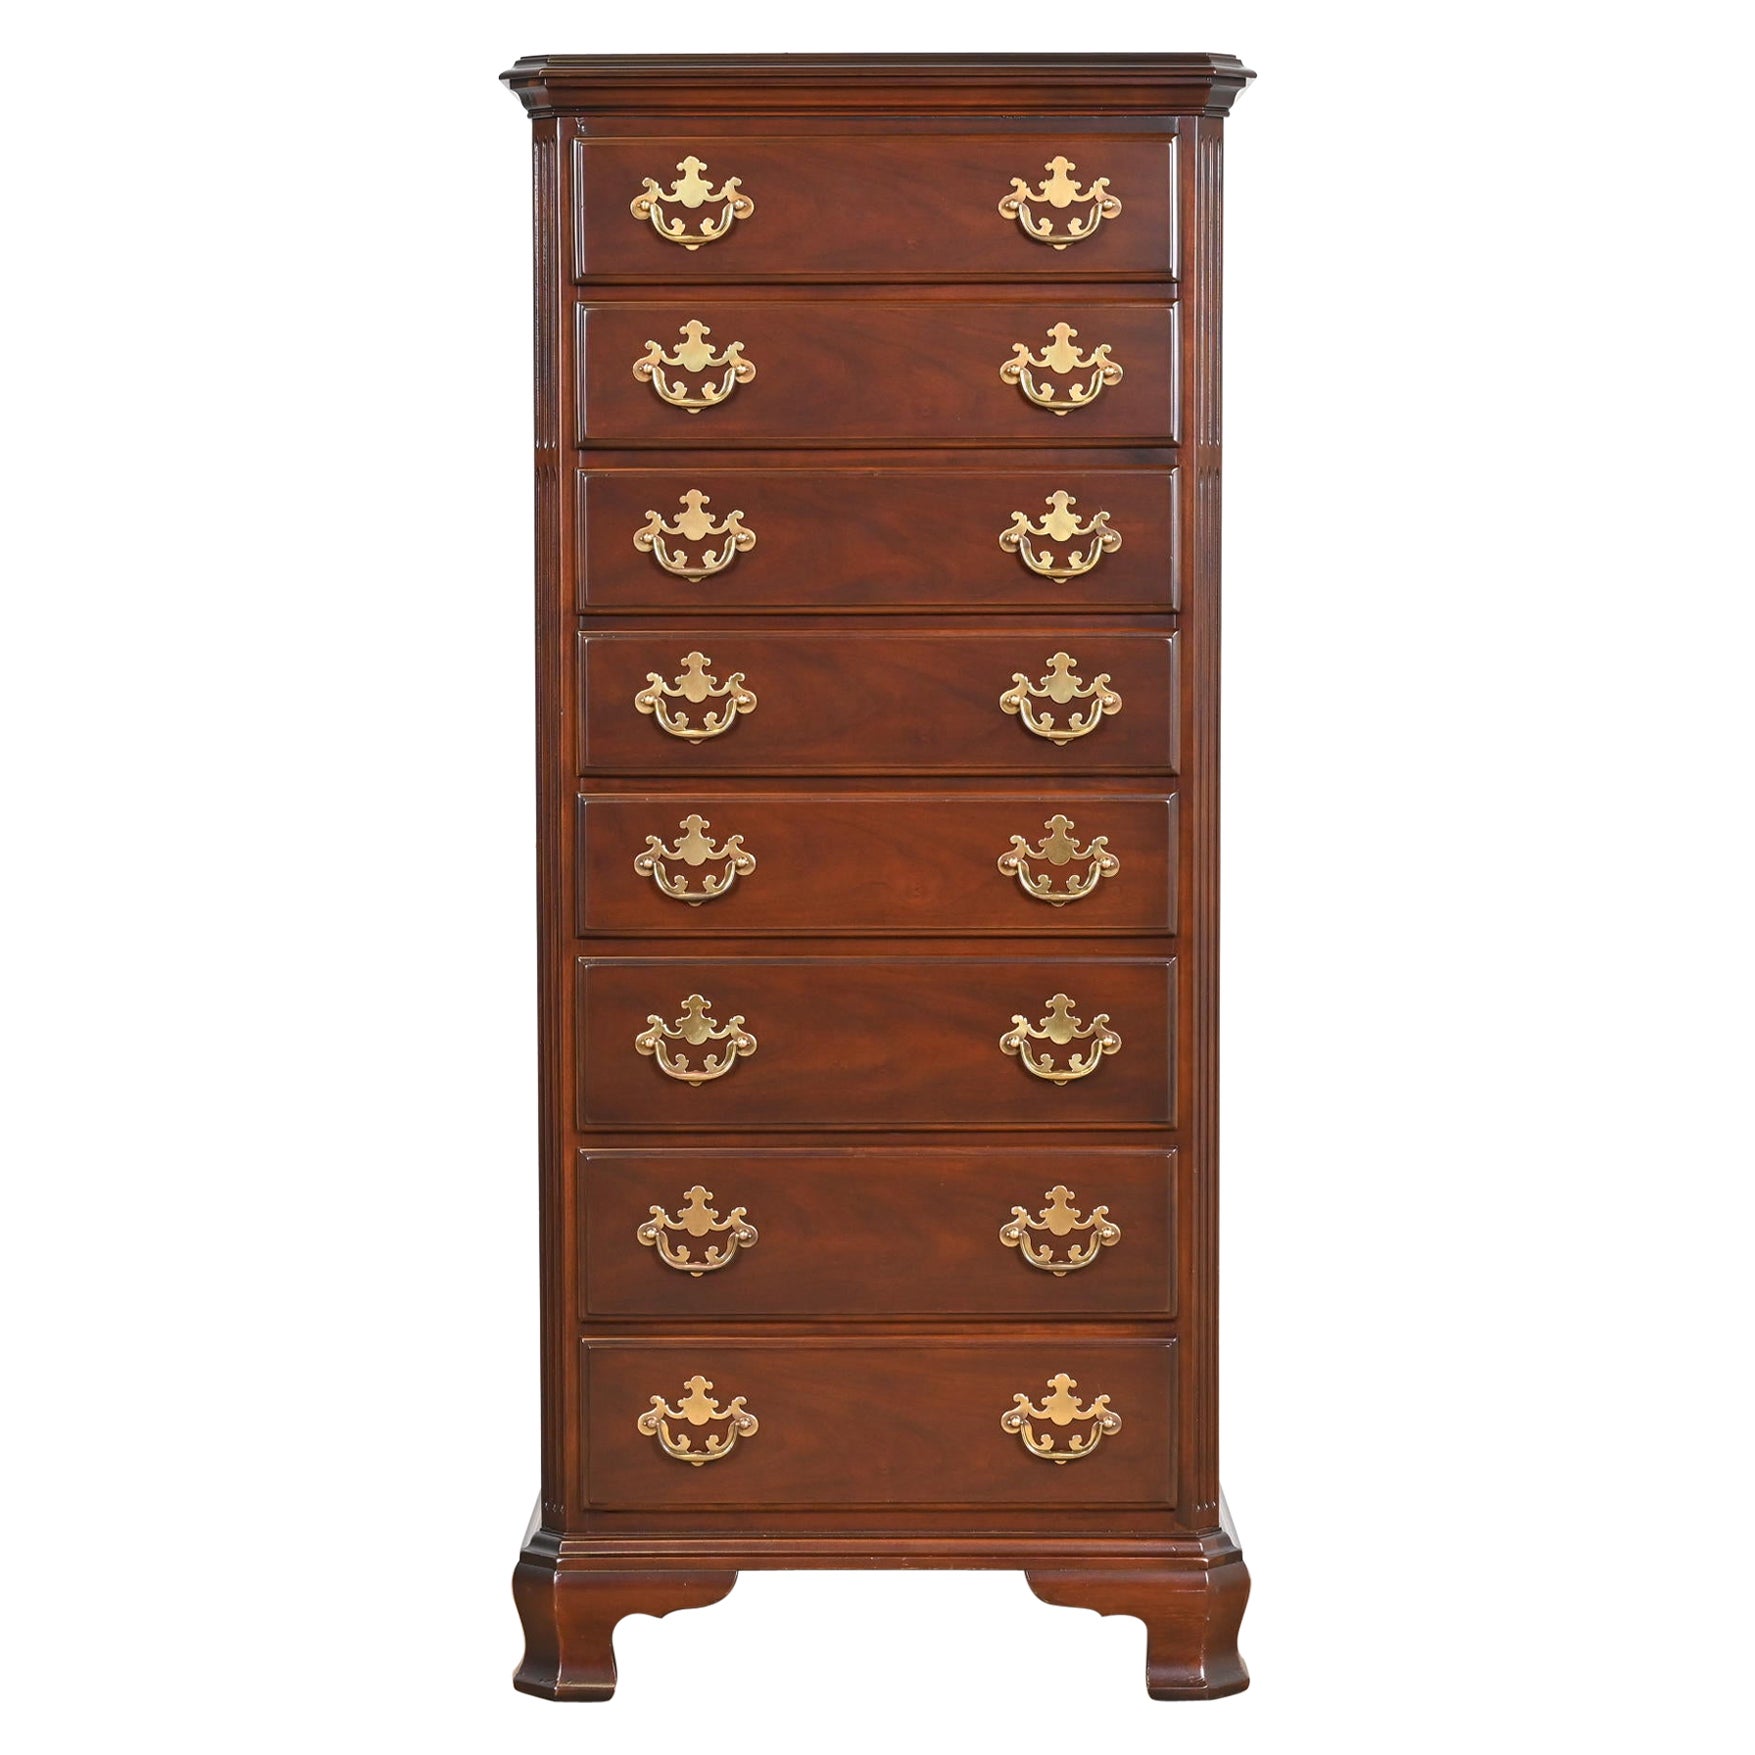 Drexel Heritage Georgian Solid Cherry Wood Lingerie Chest